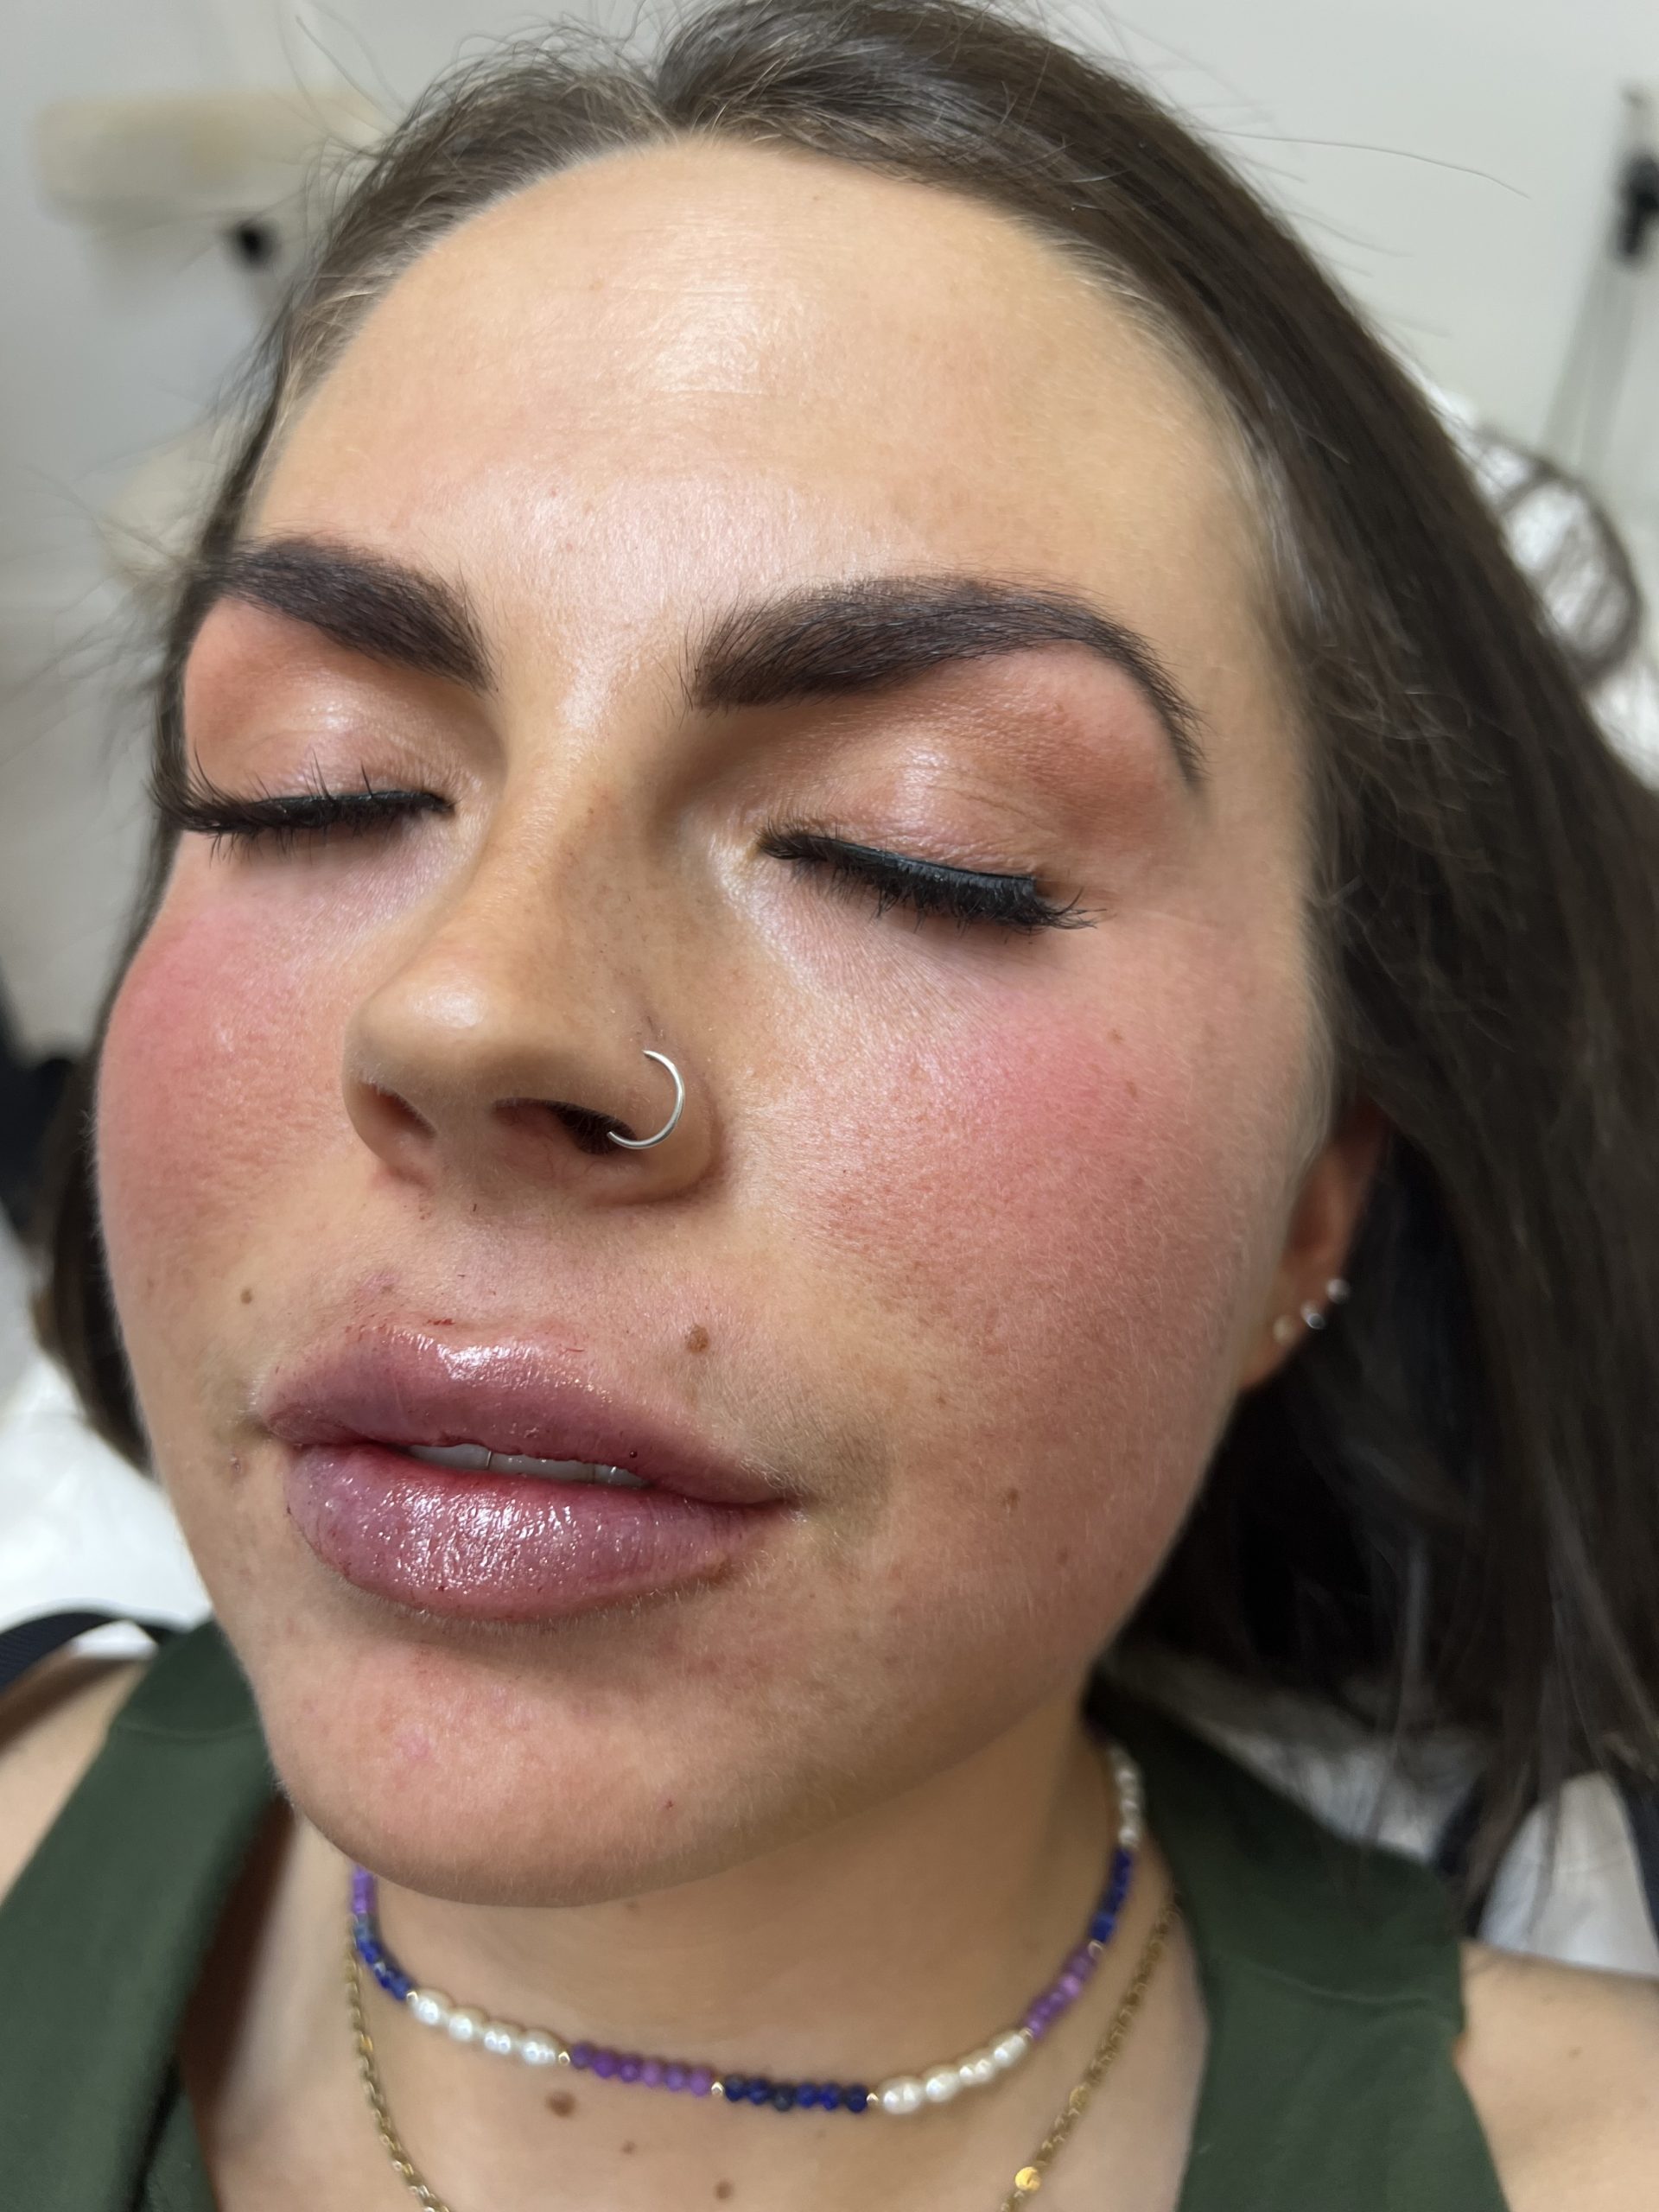 women closed her eyes and image focused on lips they show lip filler effect